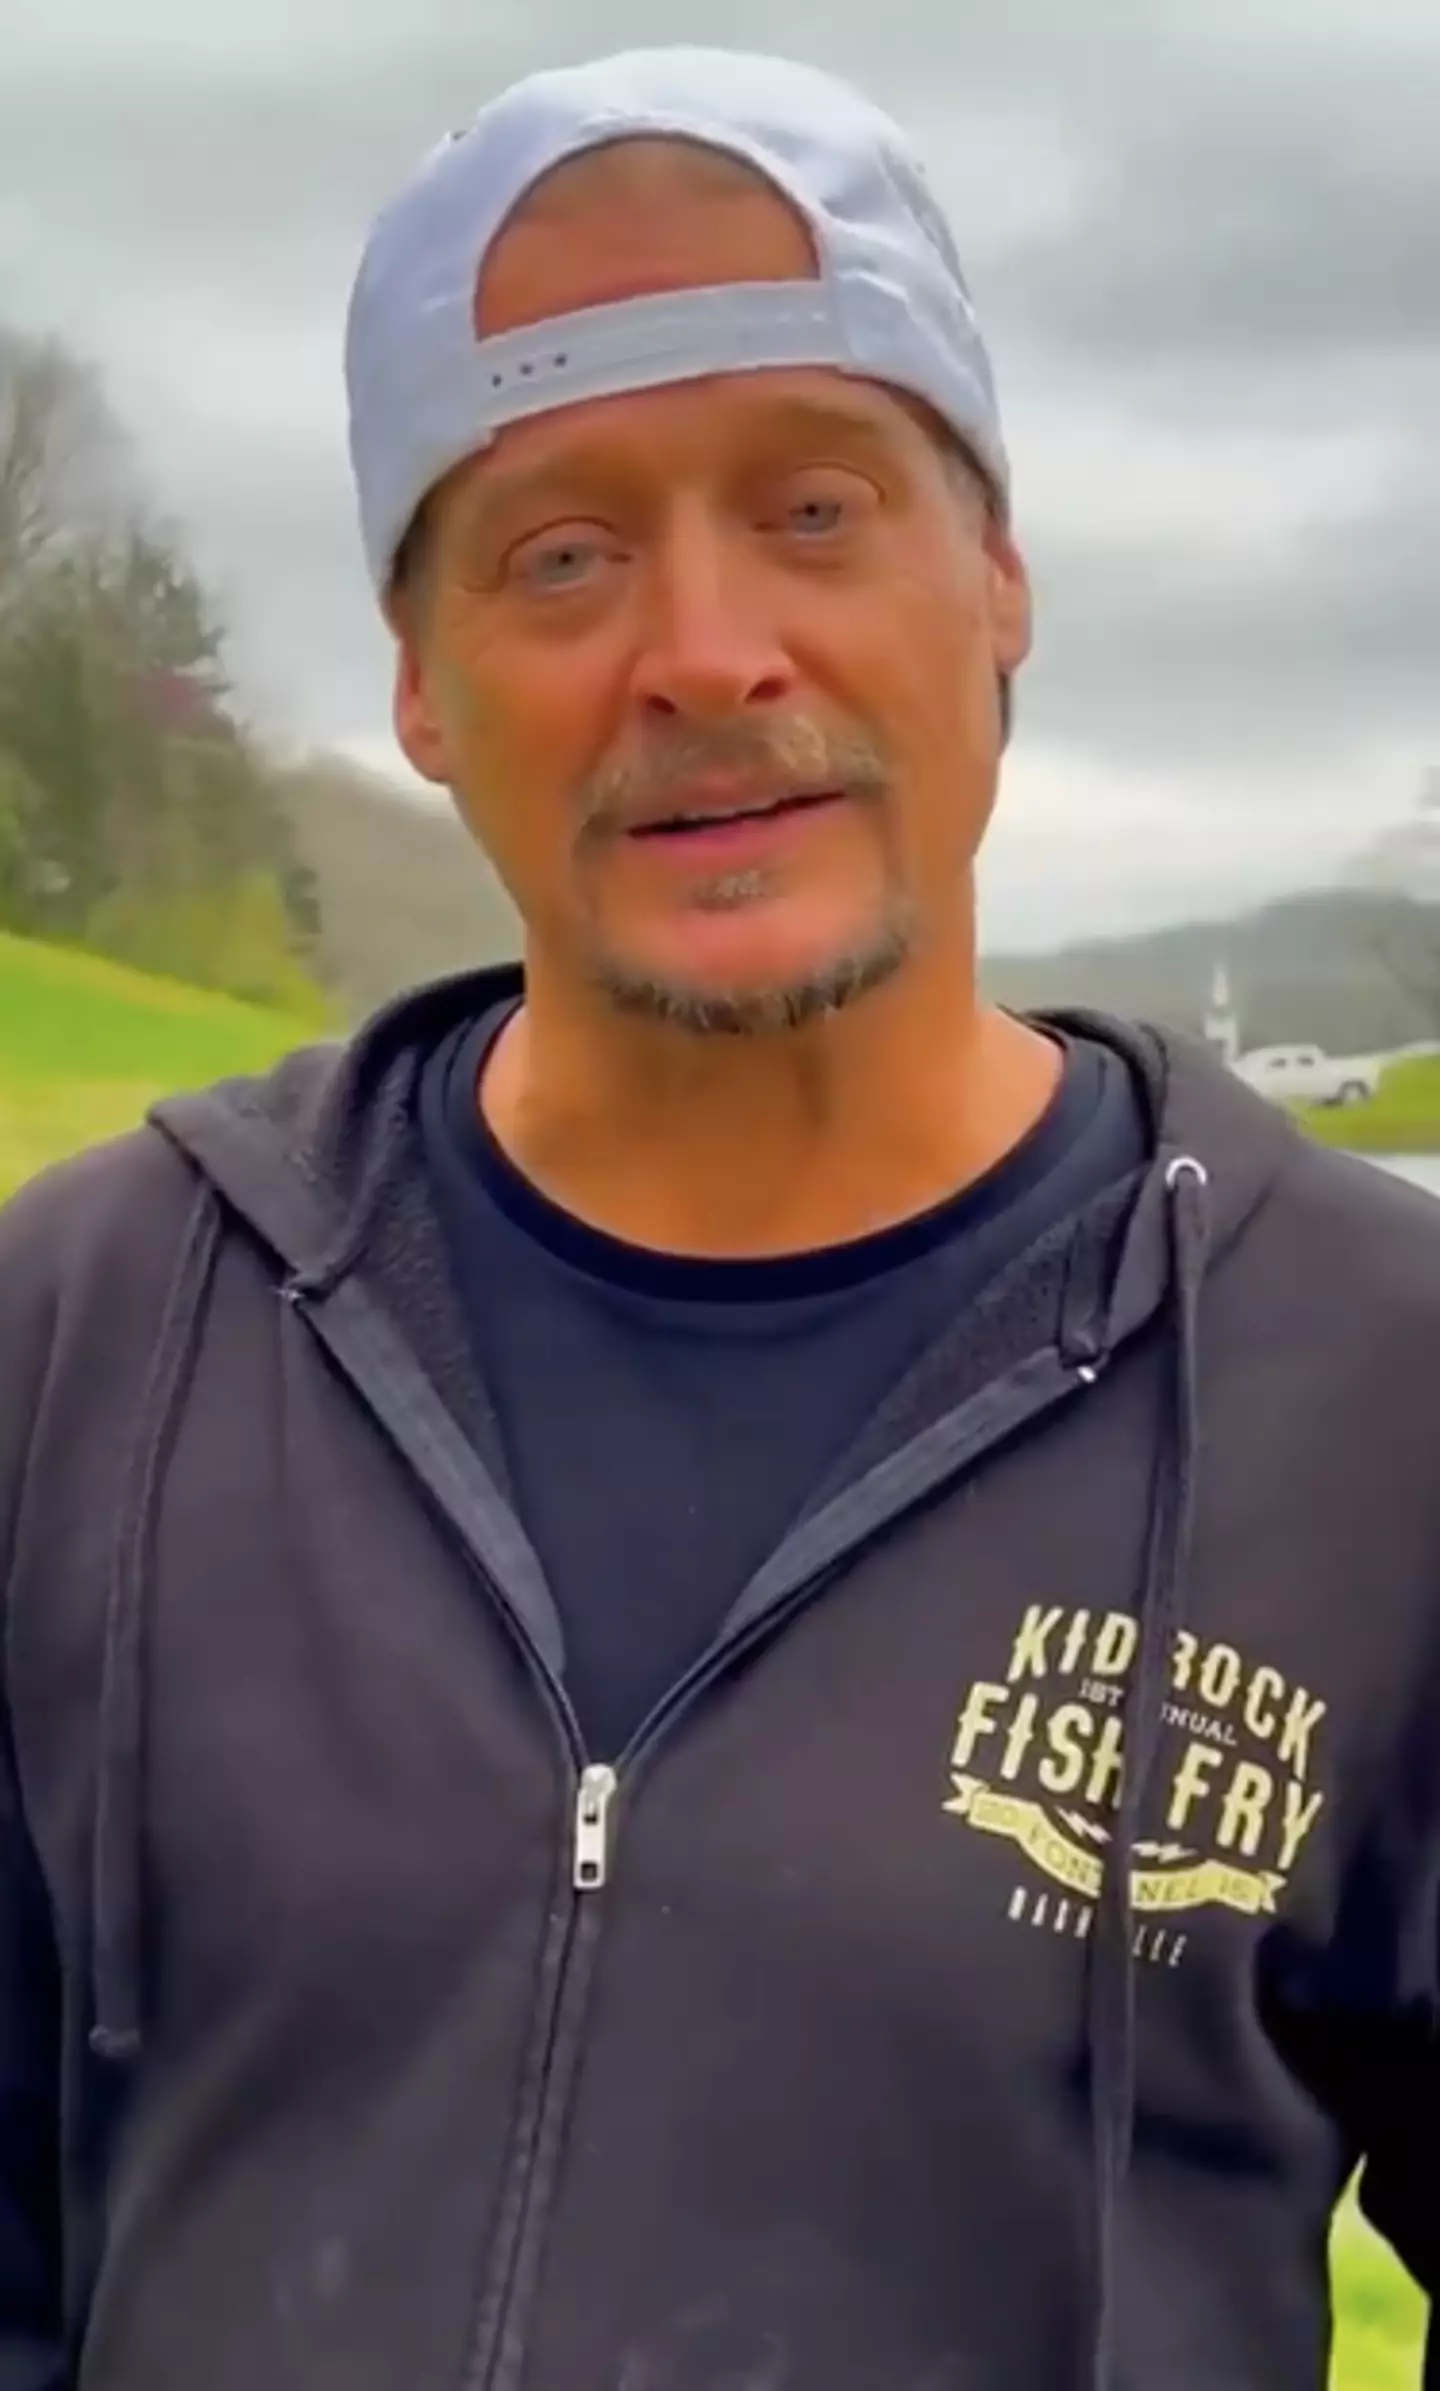 Kid Rock did not seem happy about Bud Light's partnership with a trans activist.